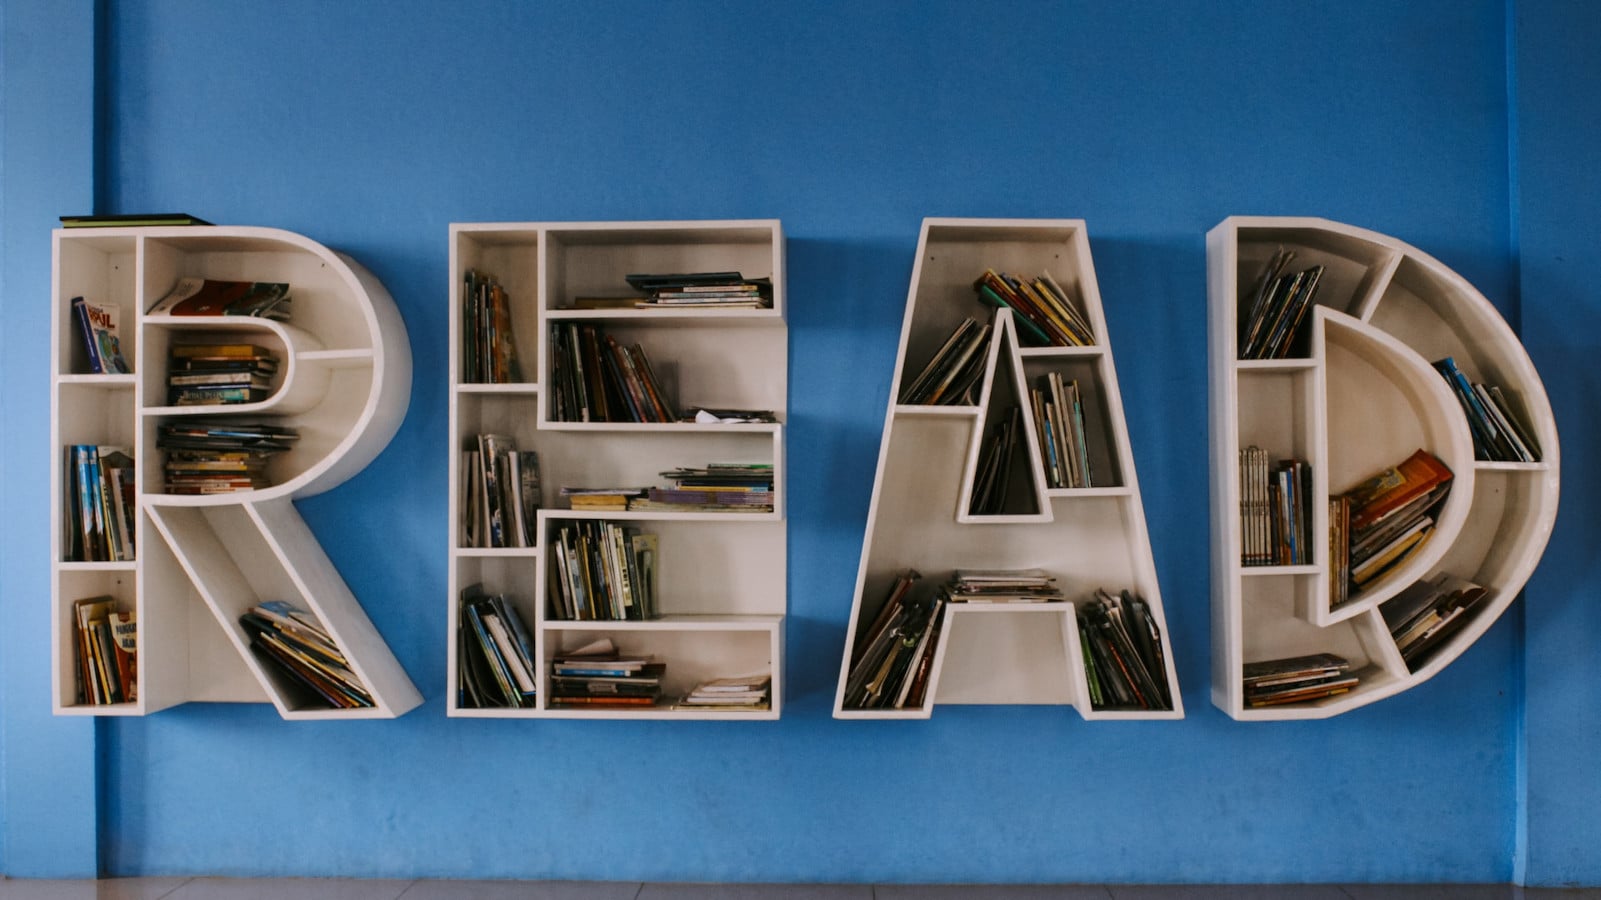 Bookshelves spelling out the word "read" - illustration for short fiction sites link page